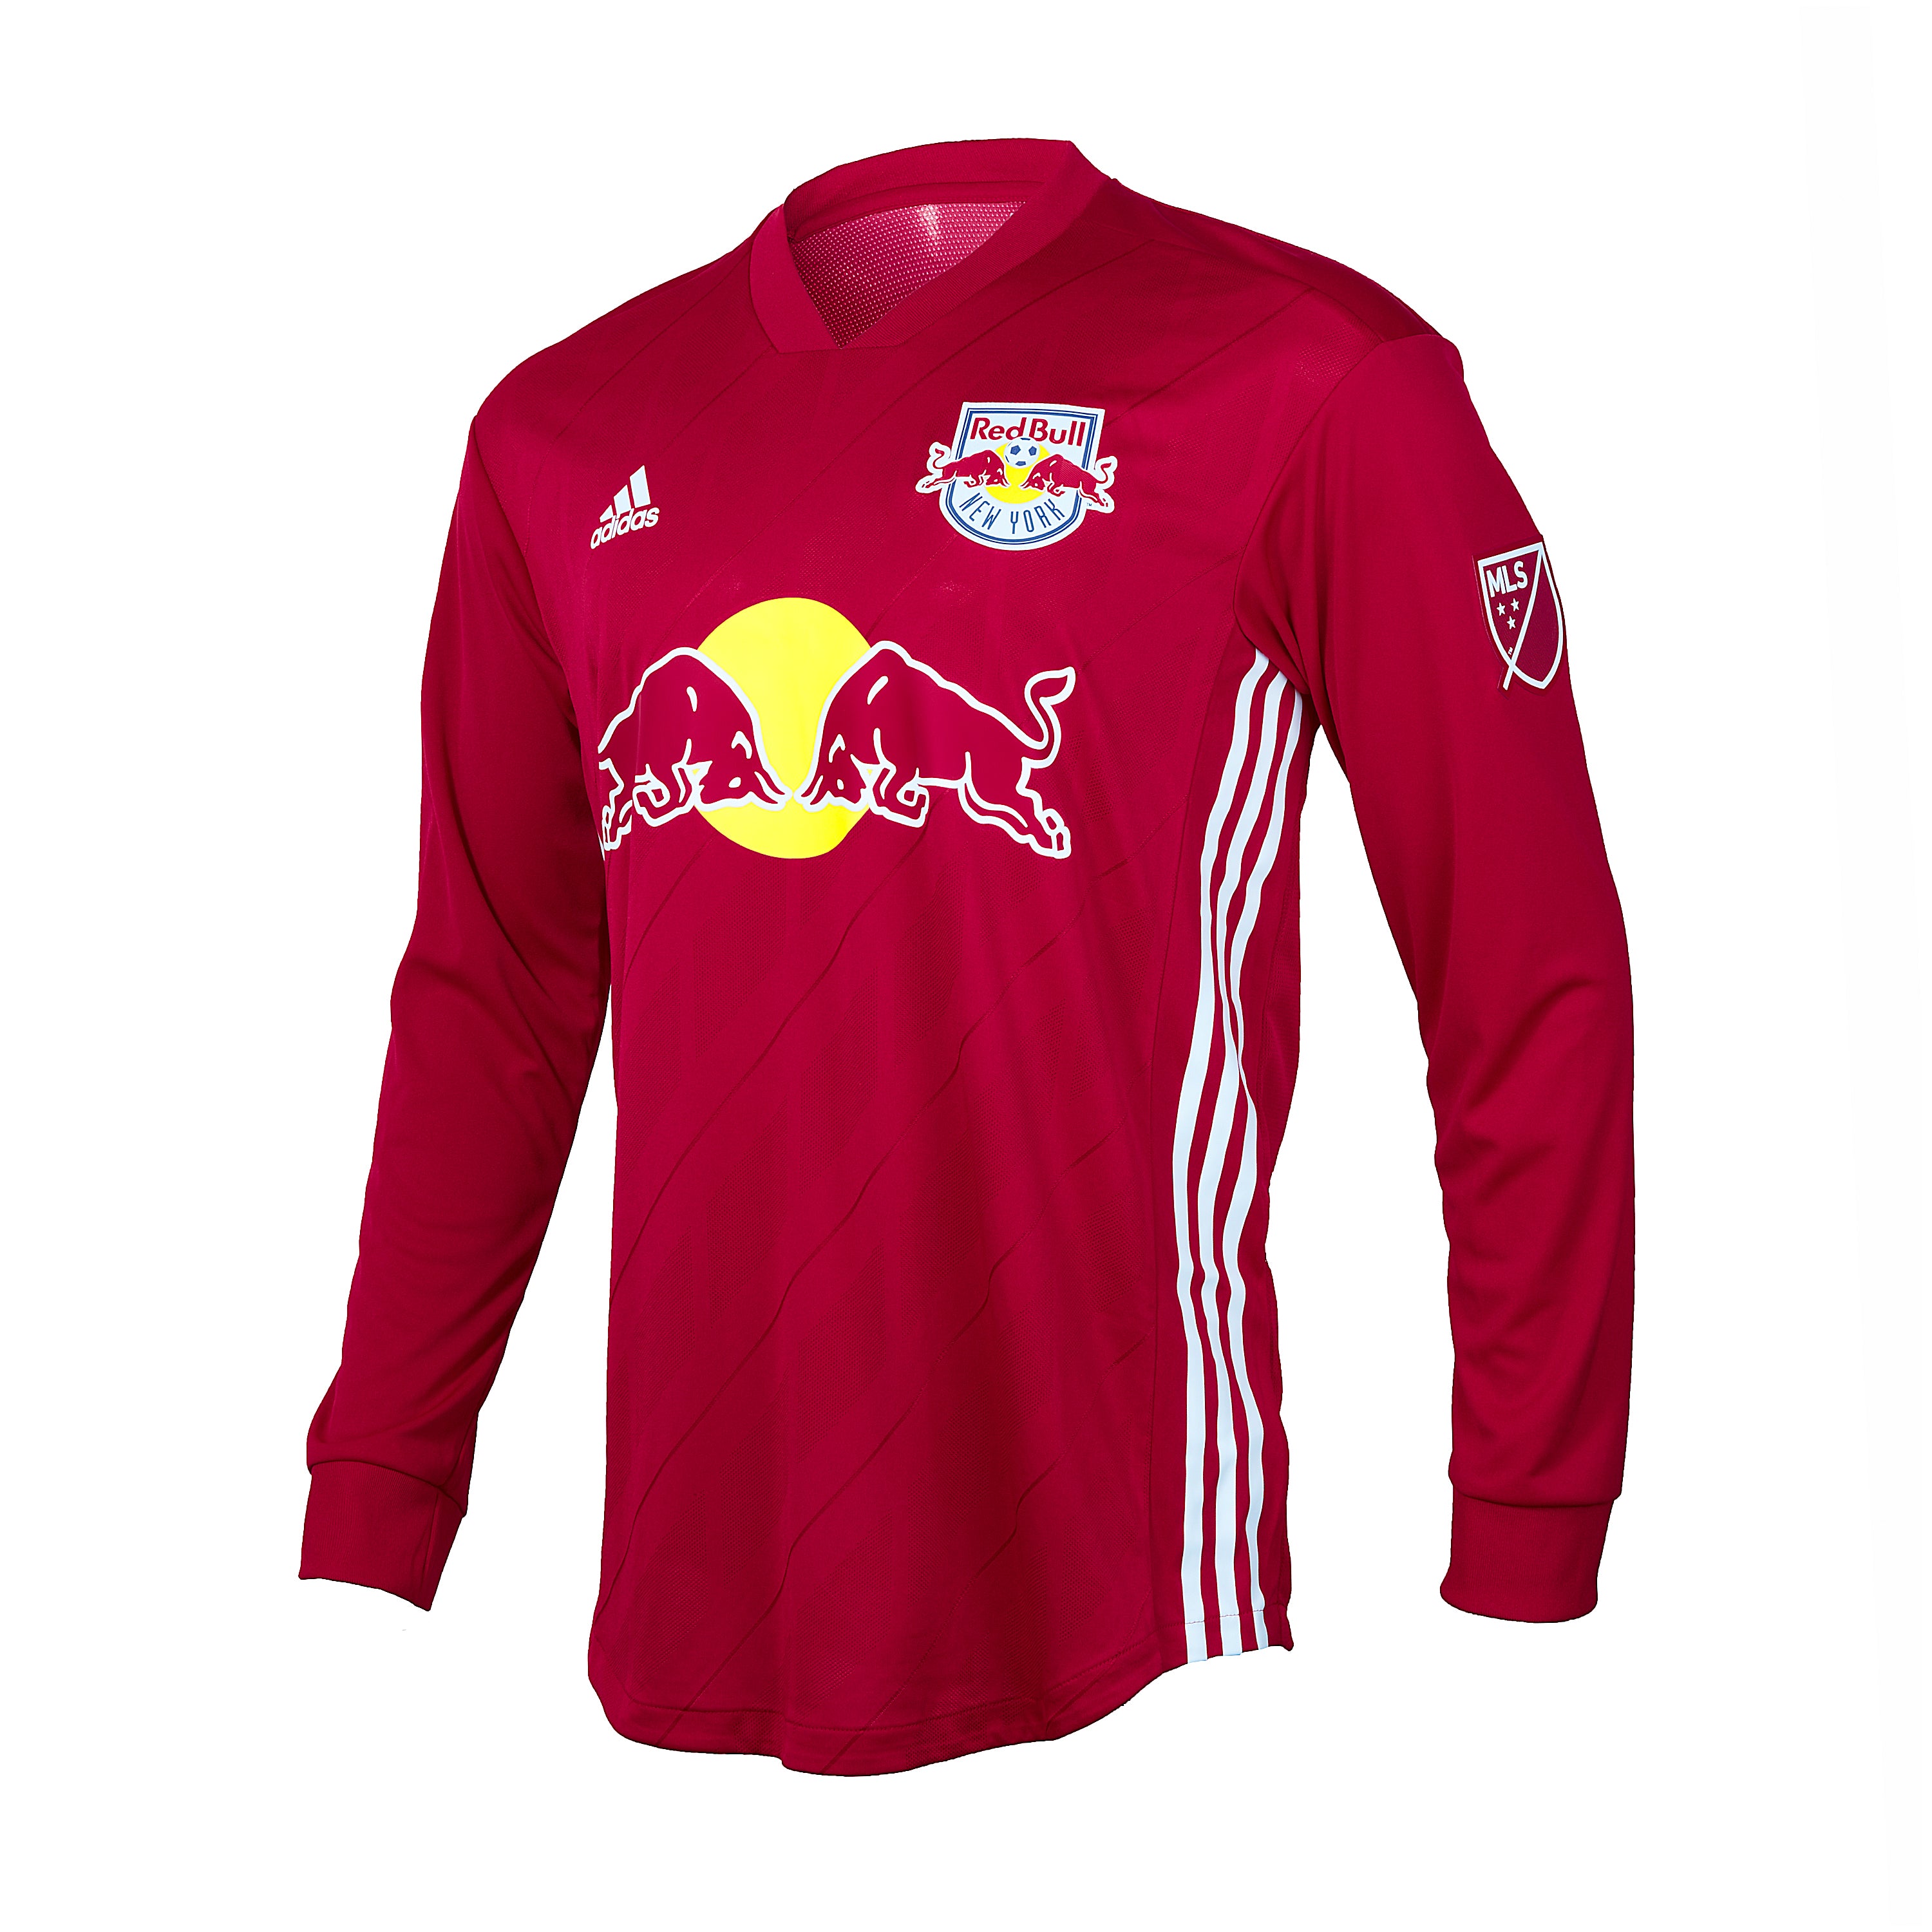 adidas red bull jersey